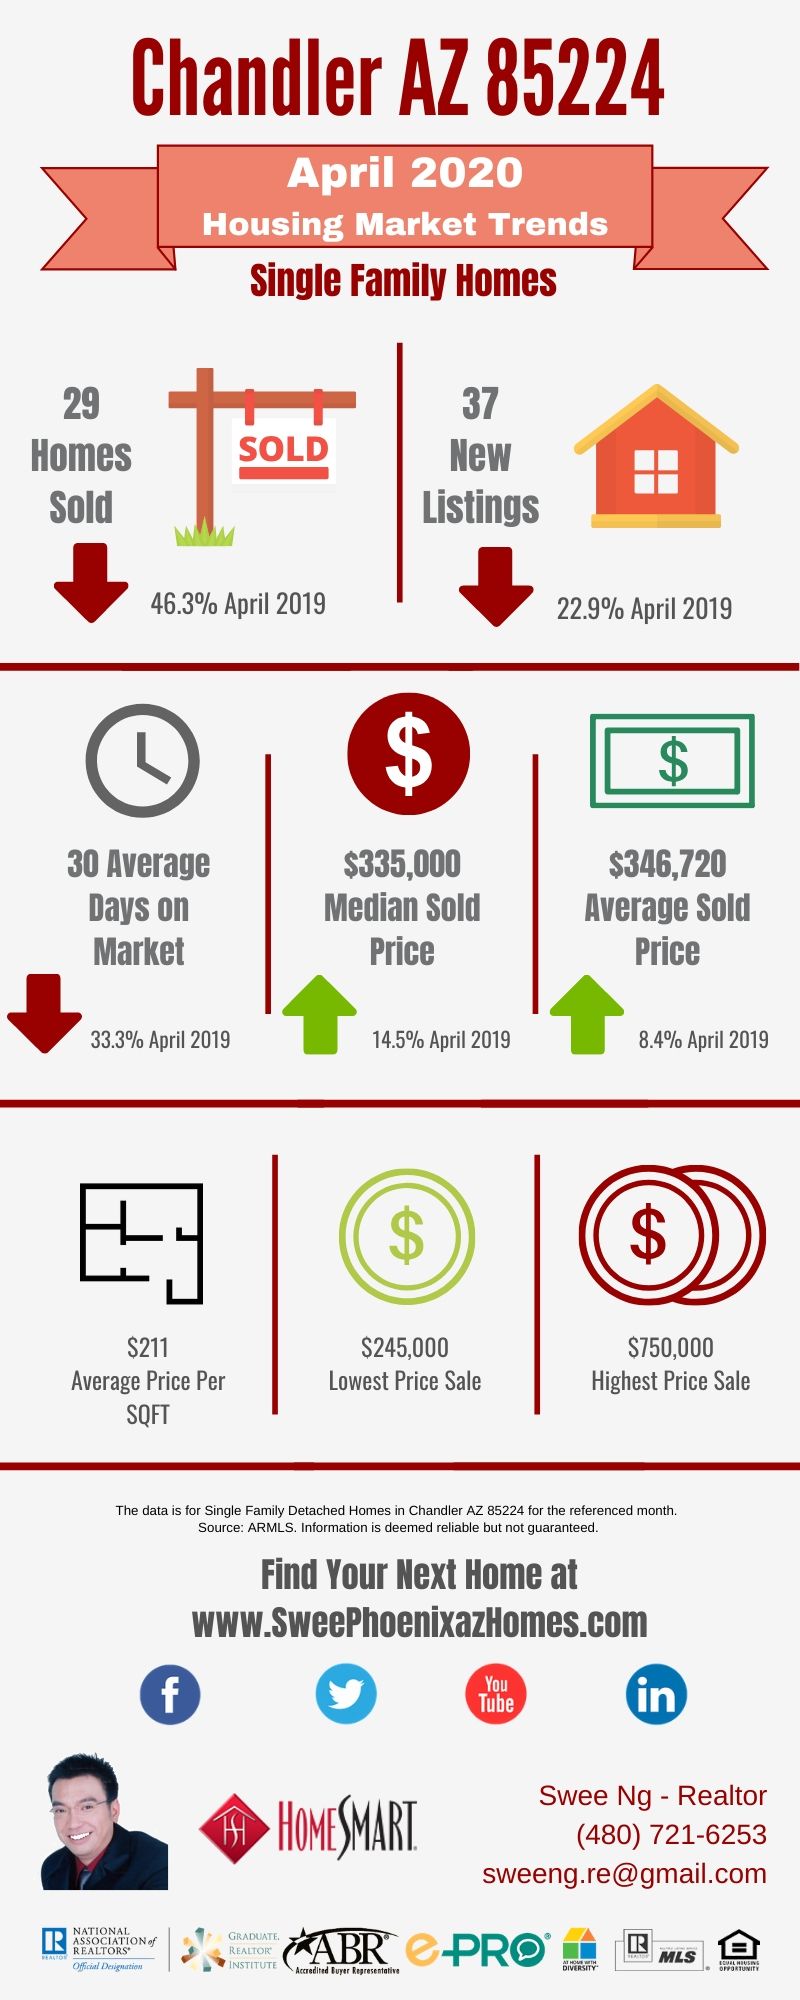 Chandler AZ 85224 Housing Market Trends Report April 2020, House Value, Real Estate and Statistic by Swee Ng